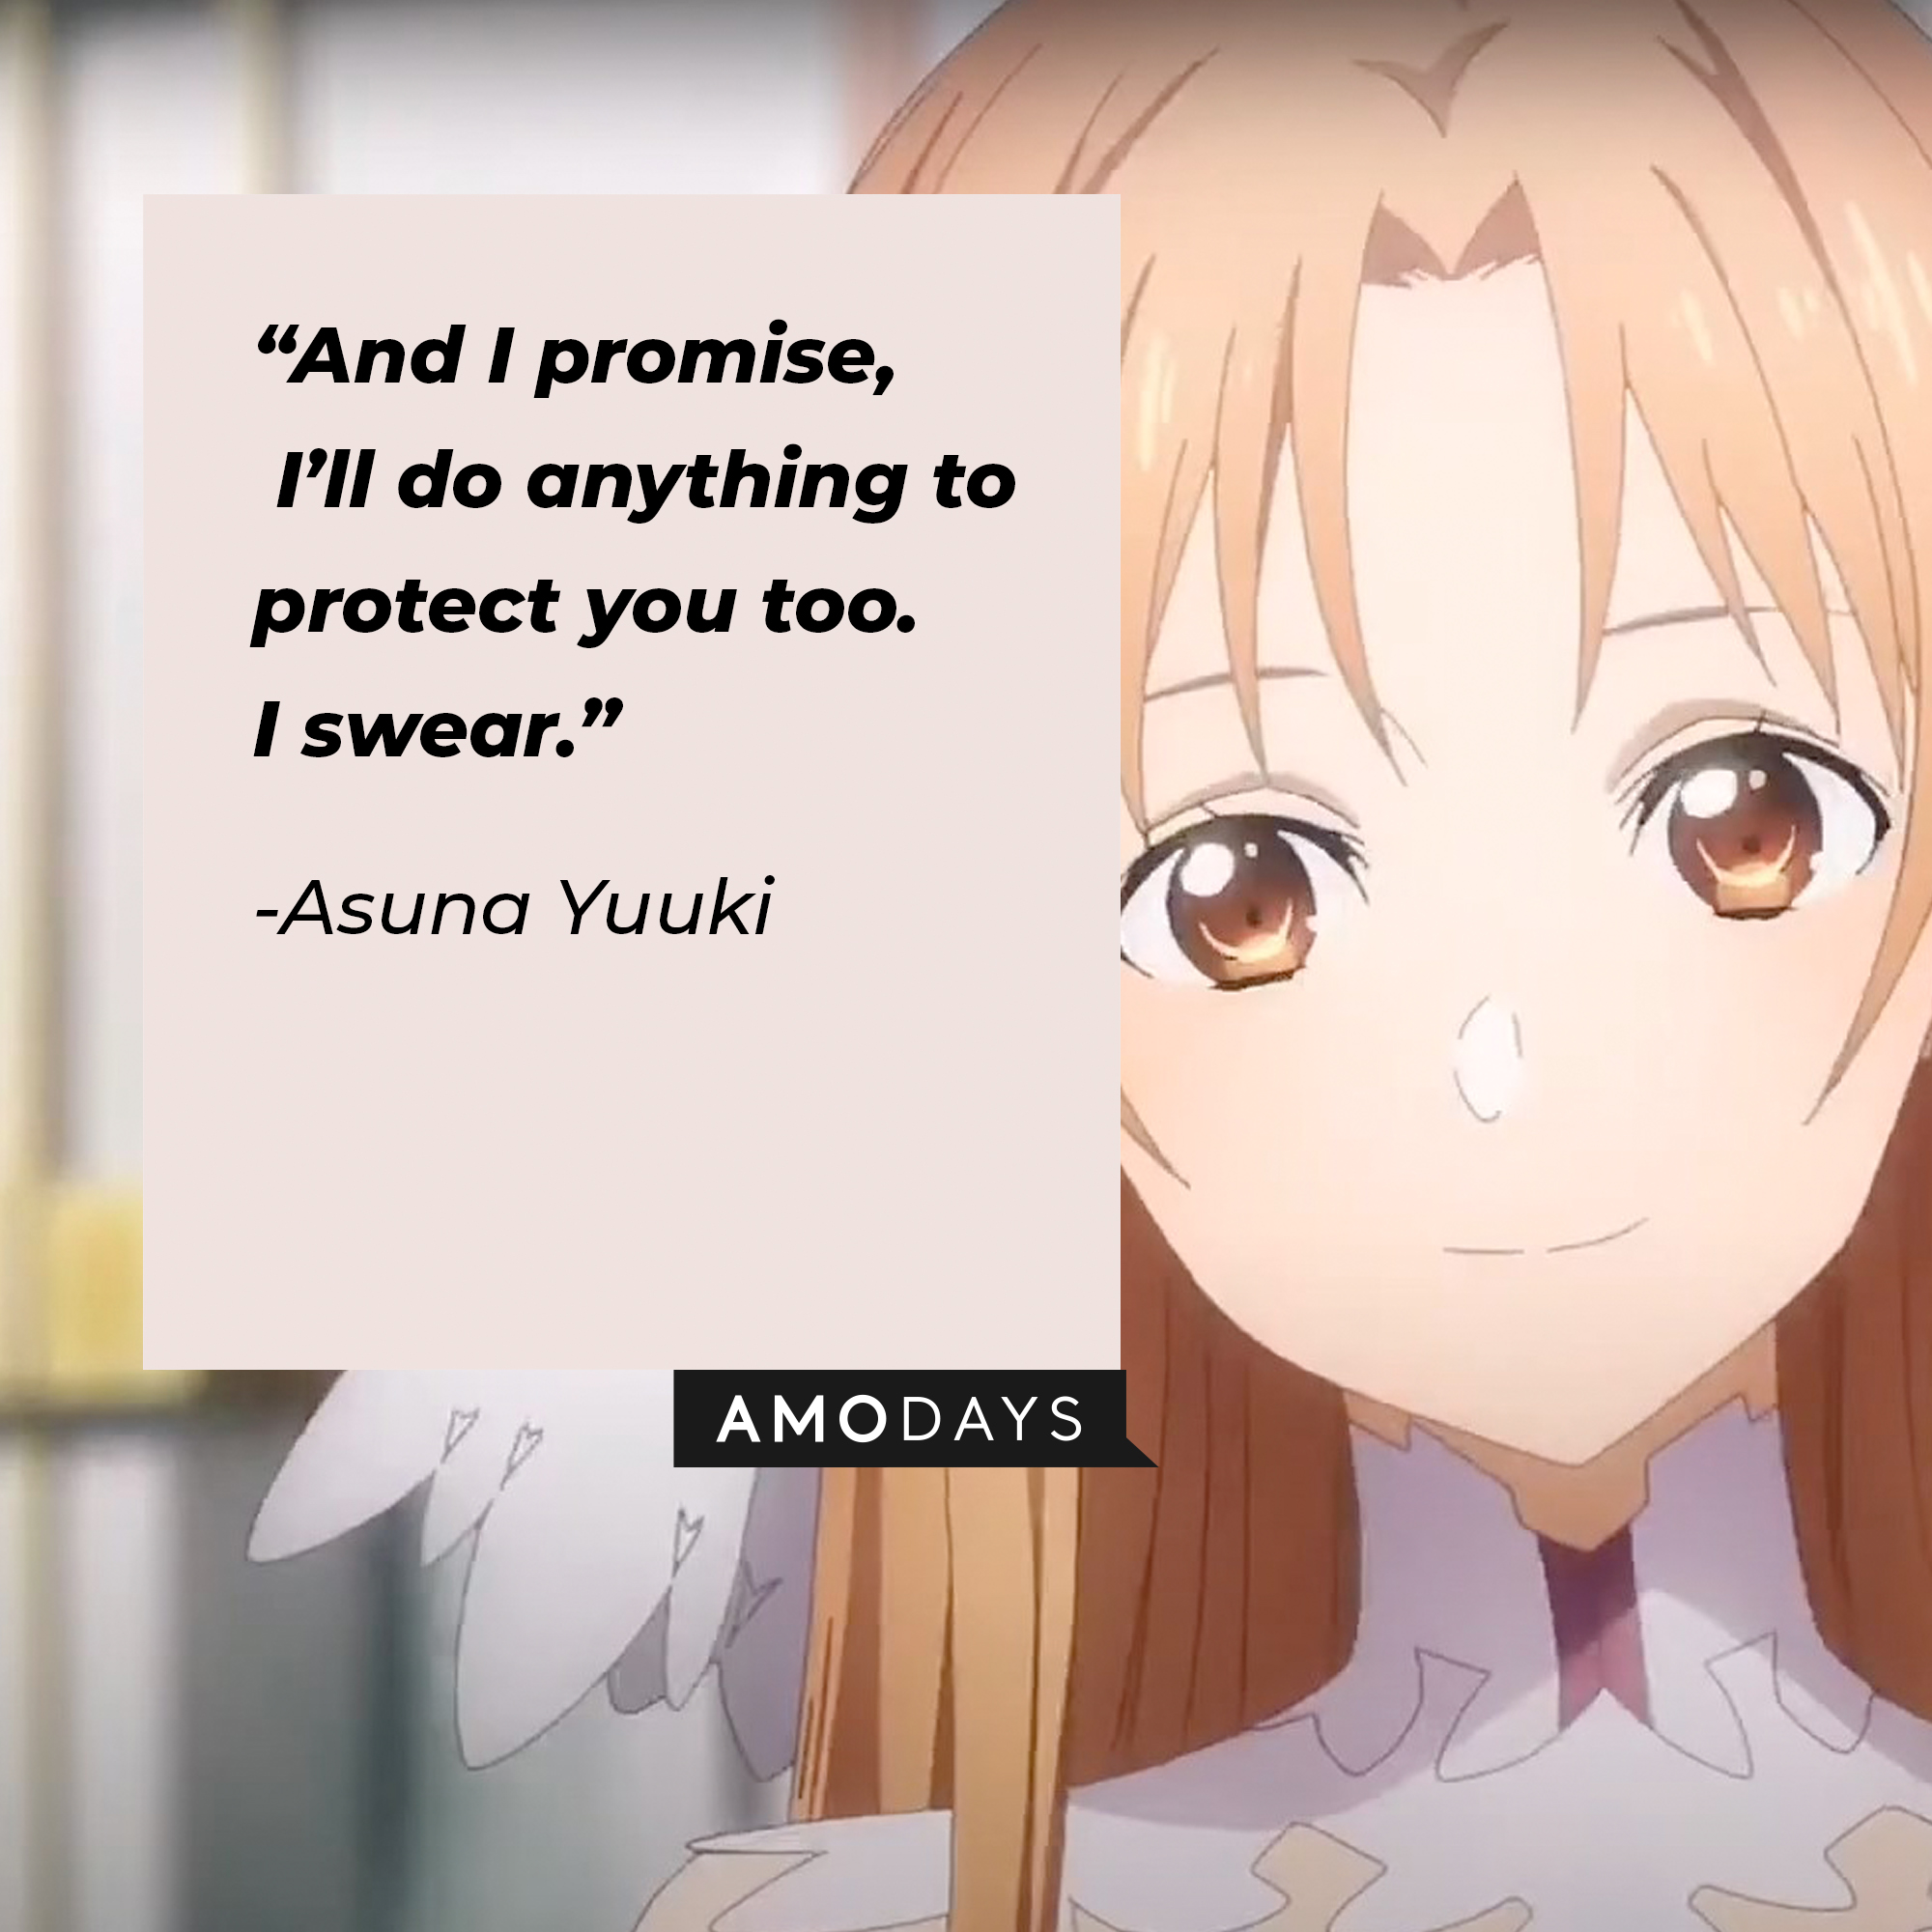 A picture of Asuna Yuuki with her quote: “And I promise, I’ll do anything to protect you too. I swear.” | Source: facebook.com/SwordArtOnlineUSA